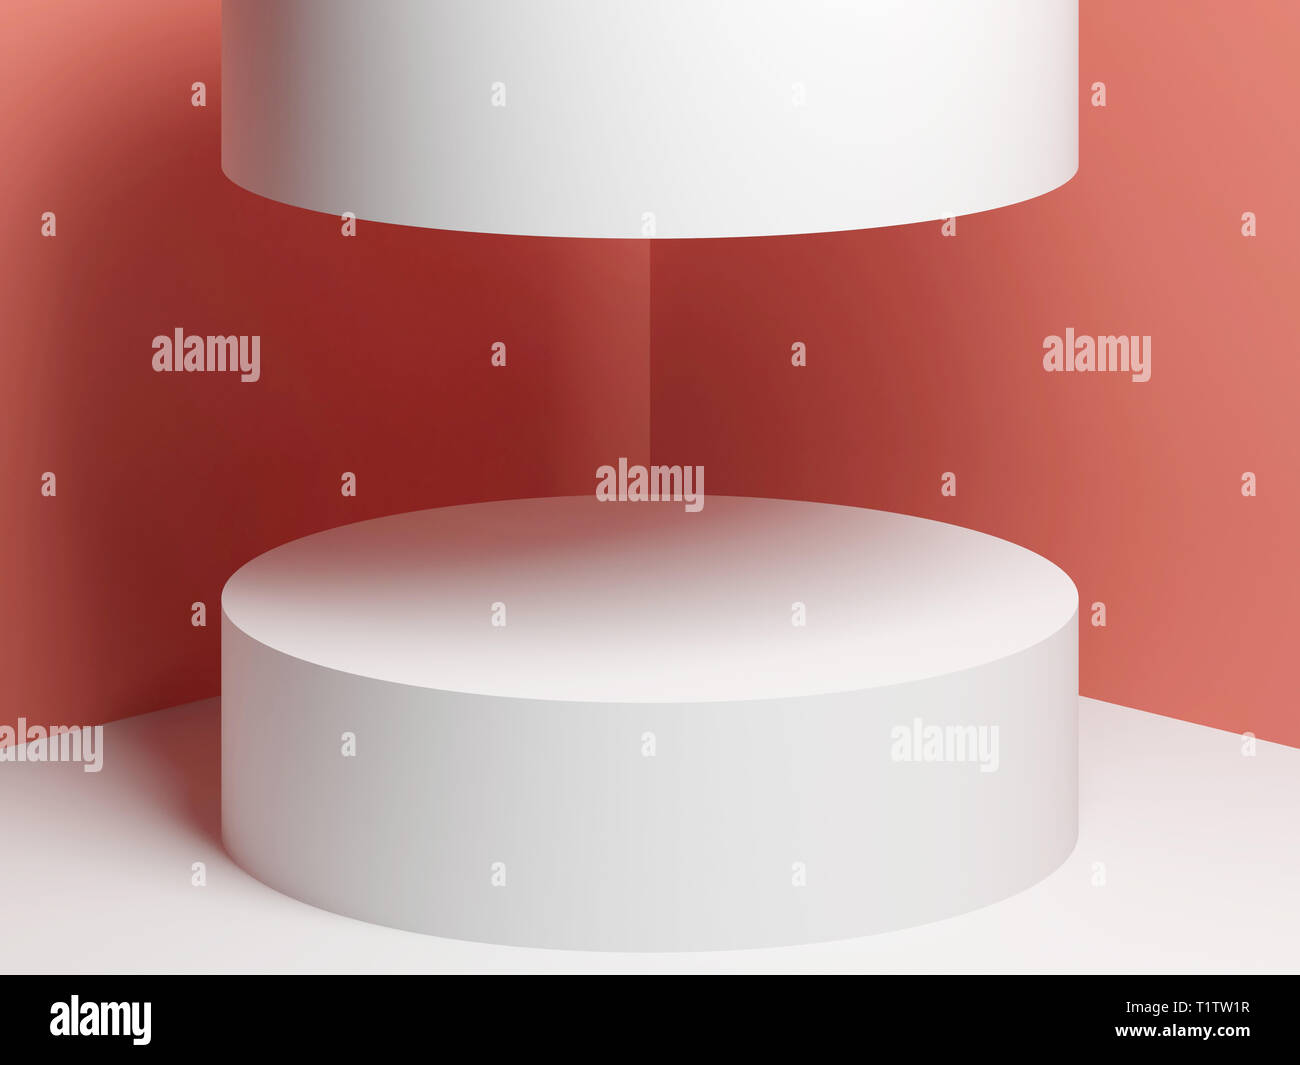 White cylindrical podium object over pink walls background, 3d render illustration Stock Photo